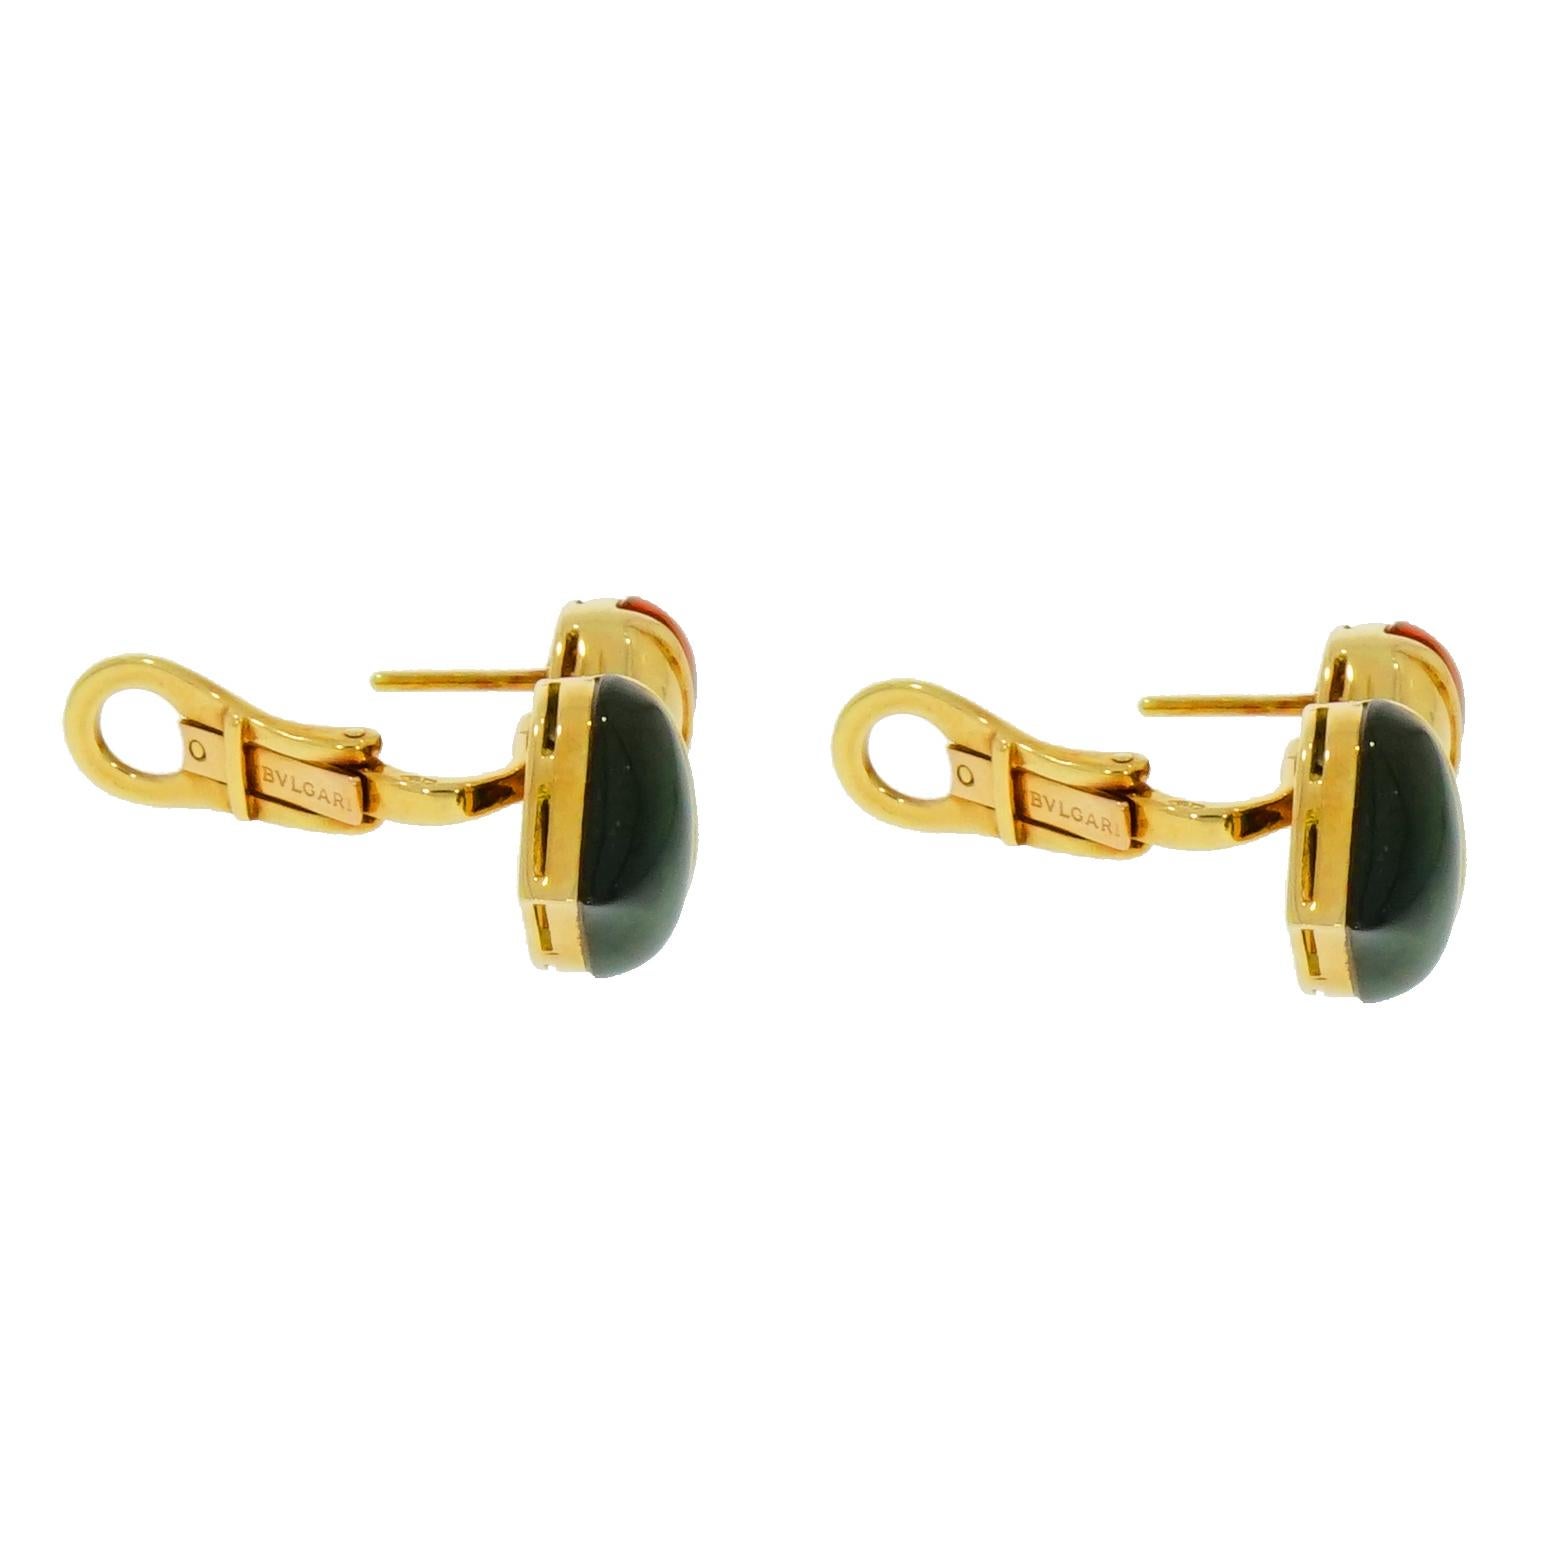 This previously loved pair of earrings is from Bvlgari's signature Naturalia collection. Features colorful fish design crafted with cabochon cut Green Tourmaline, Citrine and Diamond accent.
Set in a high polished 18 karat yellow gold and has the